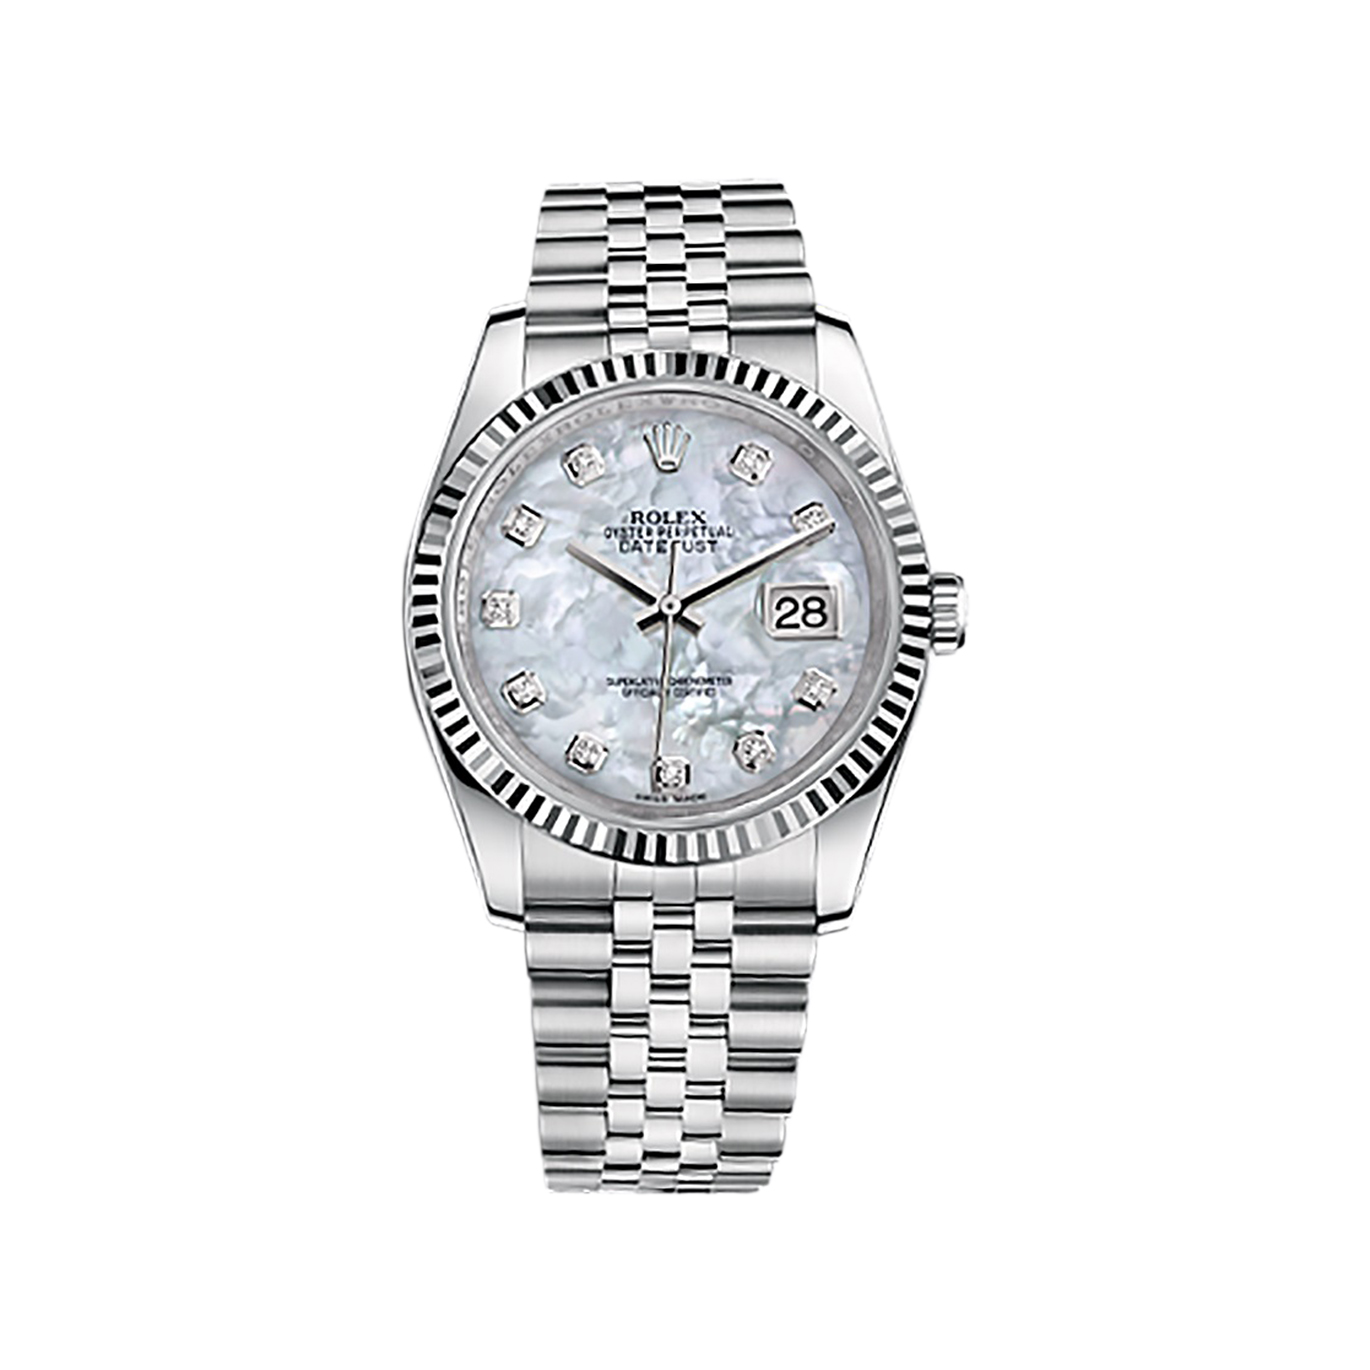 Datejust 36 116234 White Gold & Stainless Steel Watch (White Mother-of-Pearl Set with Diamonds) - Click Image to Close